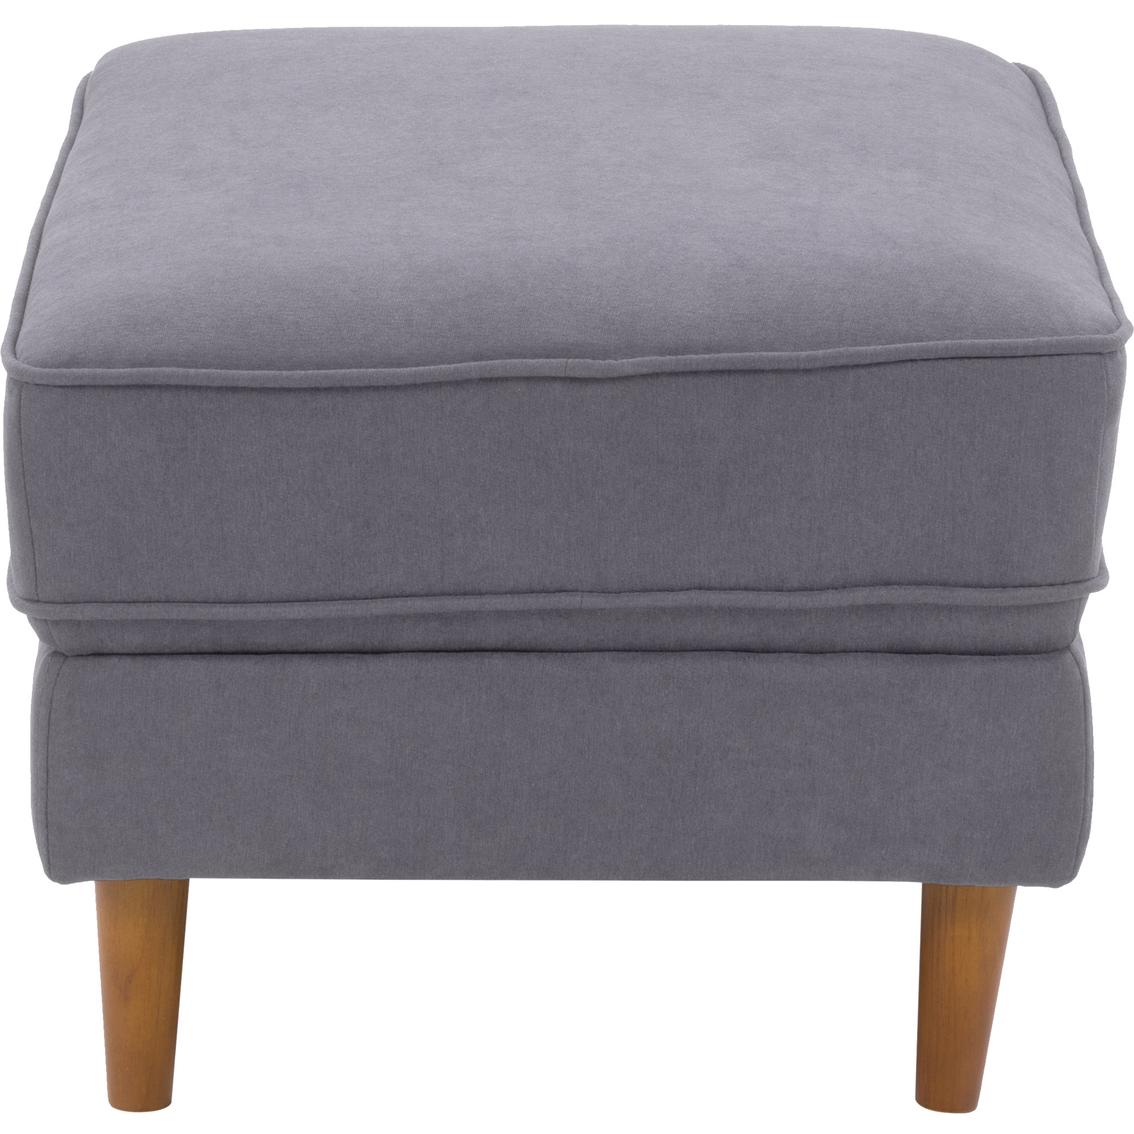 CorLiving Mulberry Fabric Upholstered Modern Ottoman - Image 3 of 6